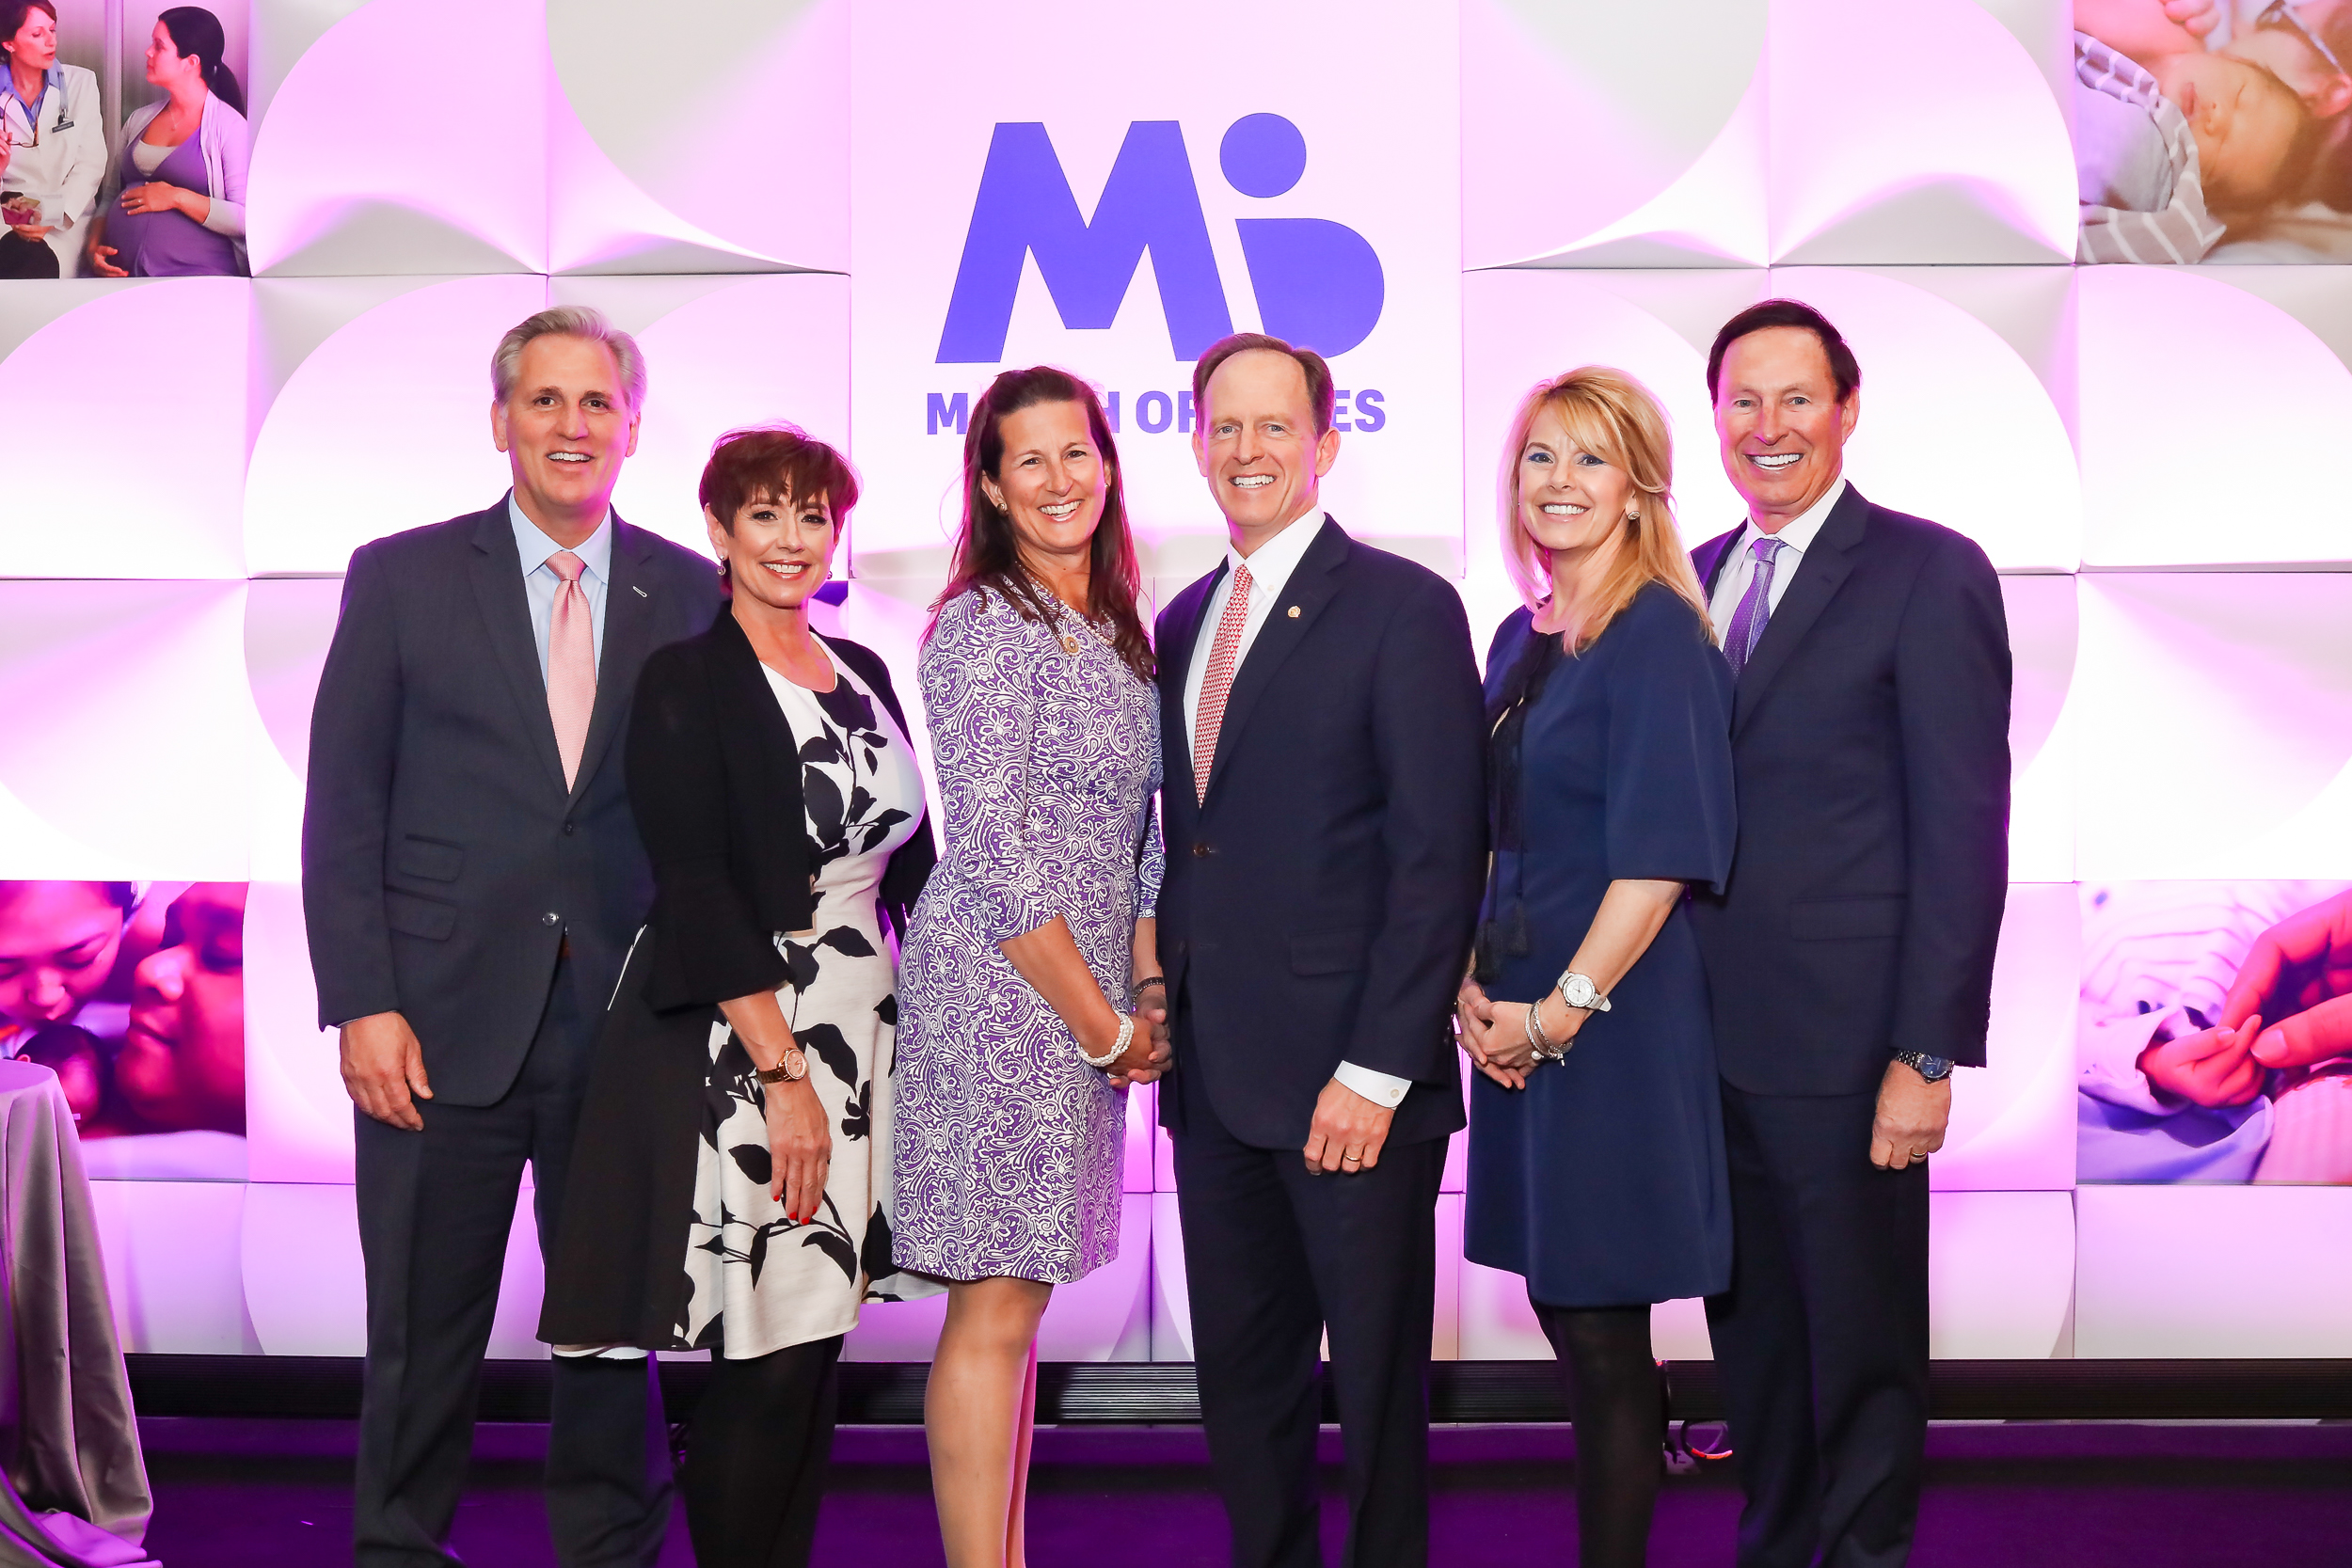 The NACDS Foundation served as a Platinum Sponsor of the 36th Annual March of Dimes Gourmet Gala